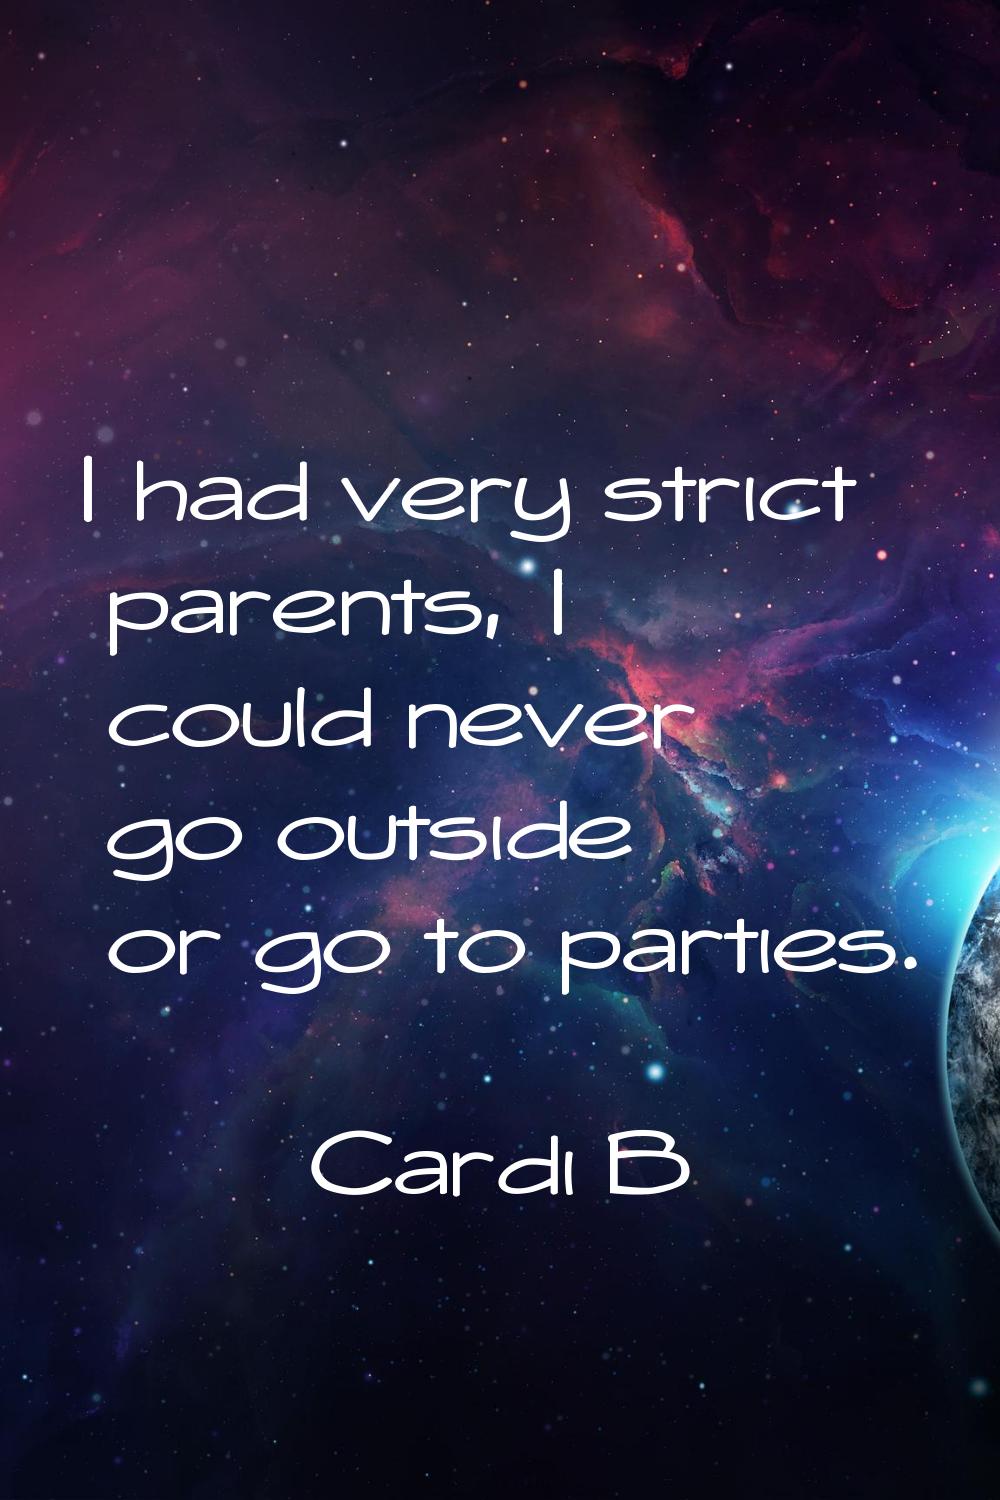 I had very strict parents, I could never go outside or go to parties.